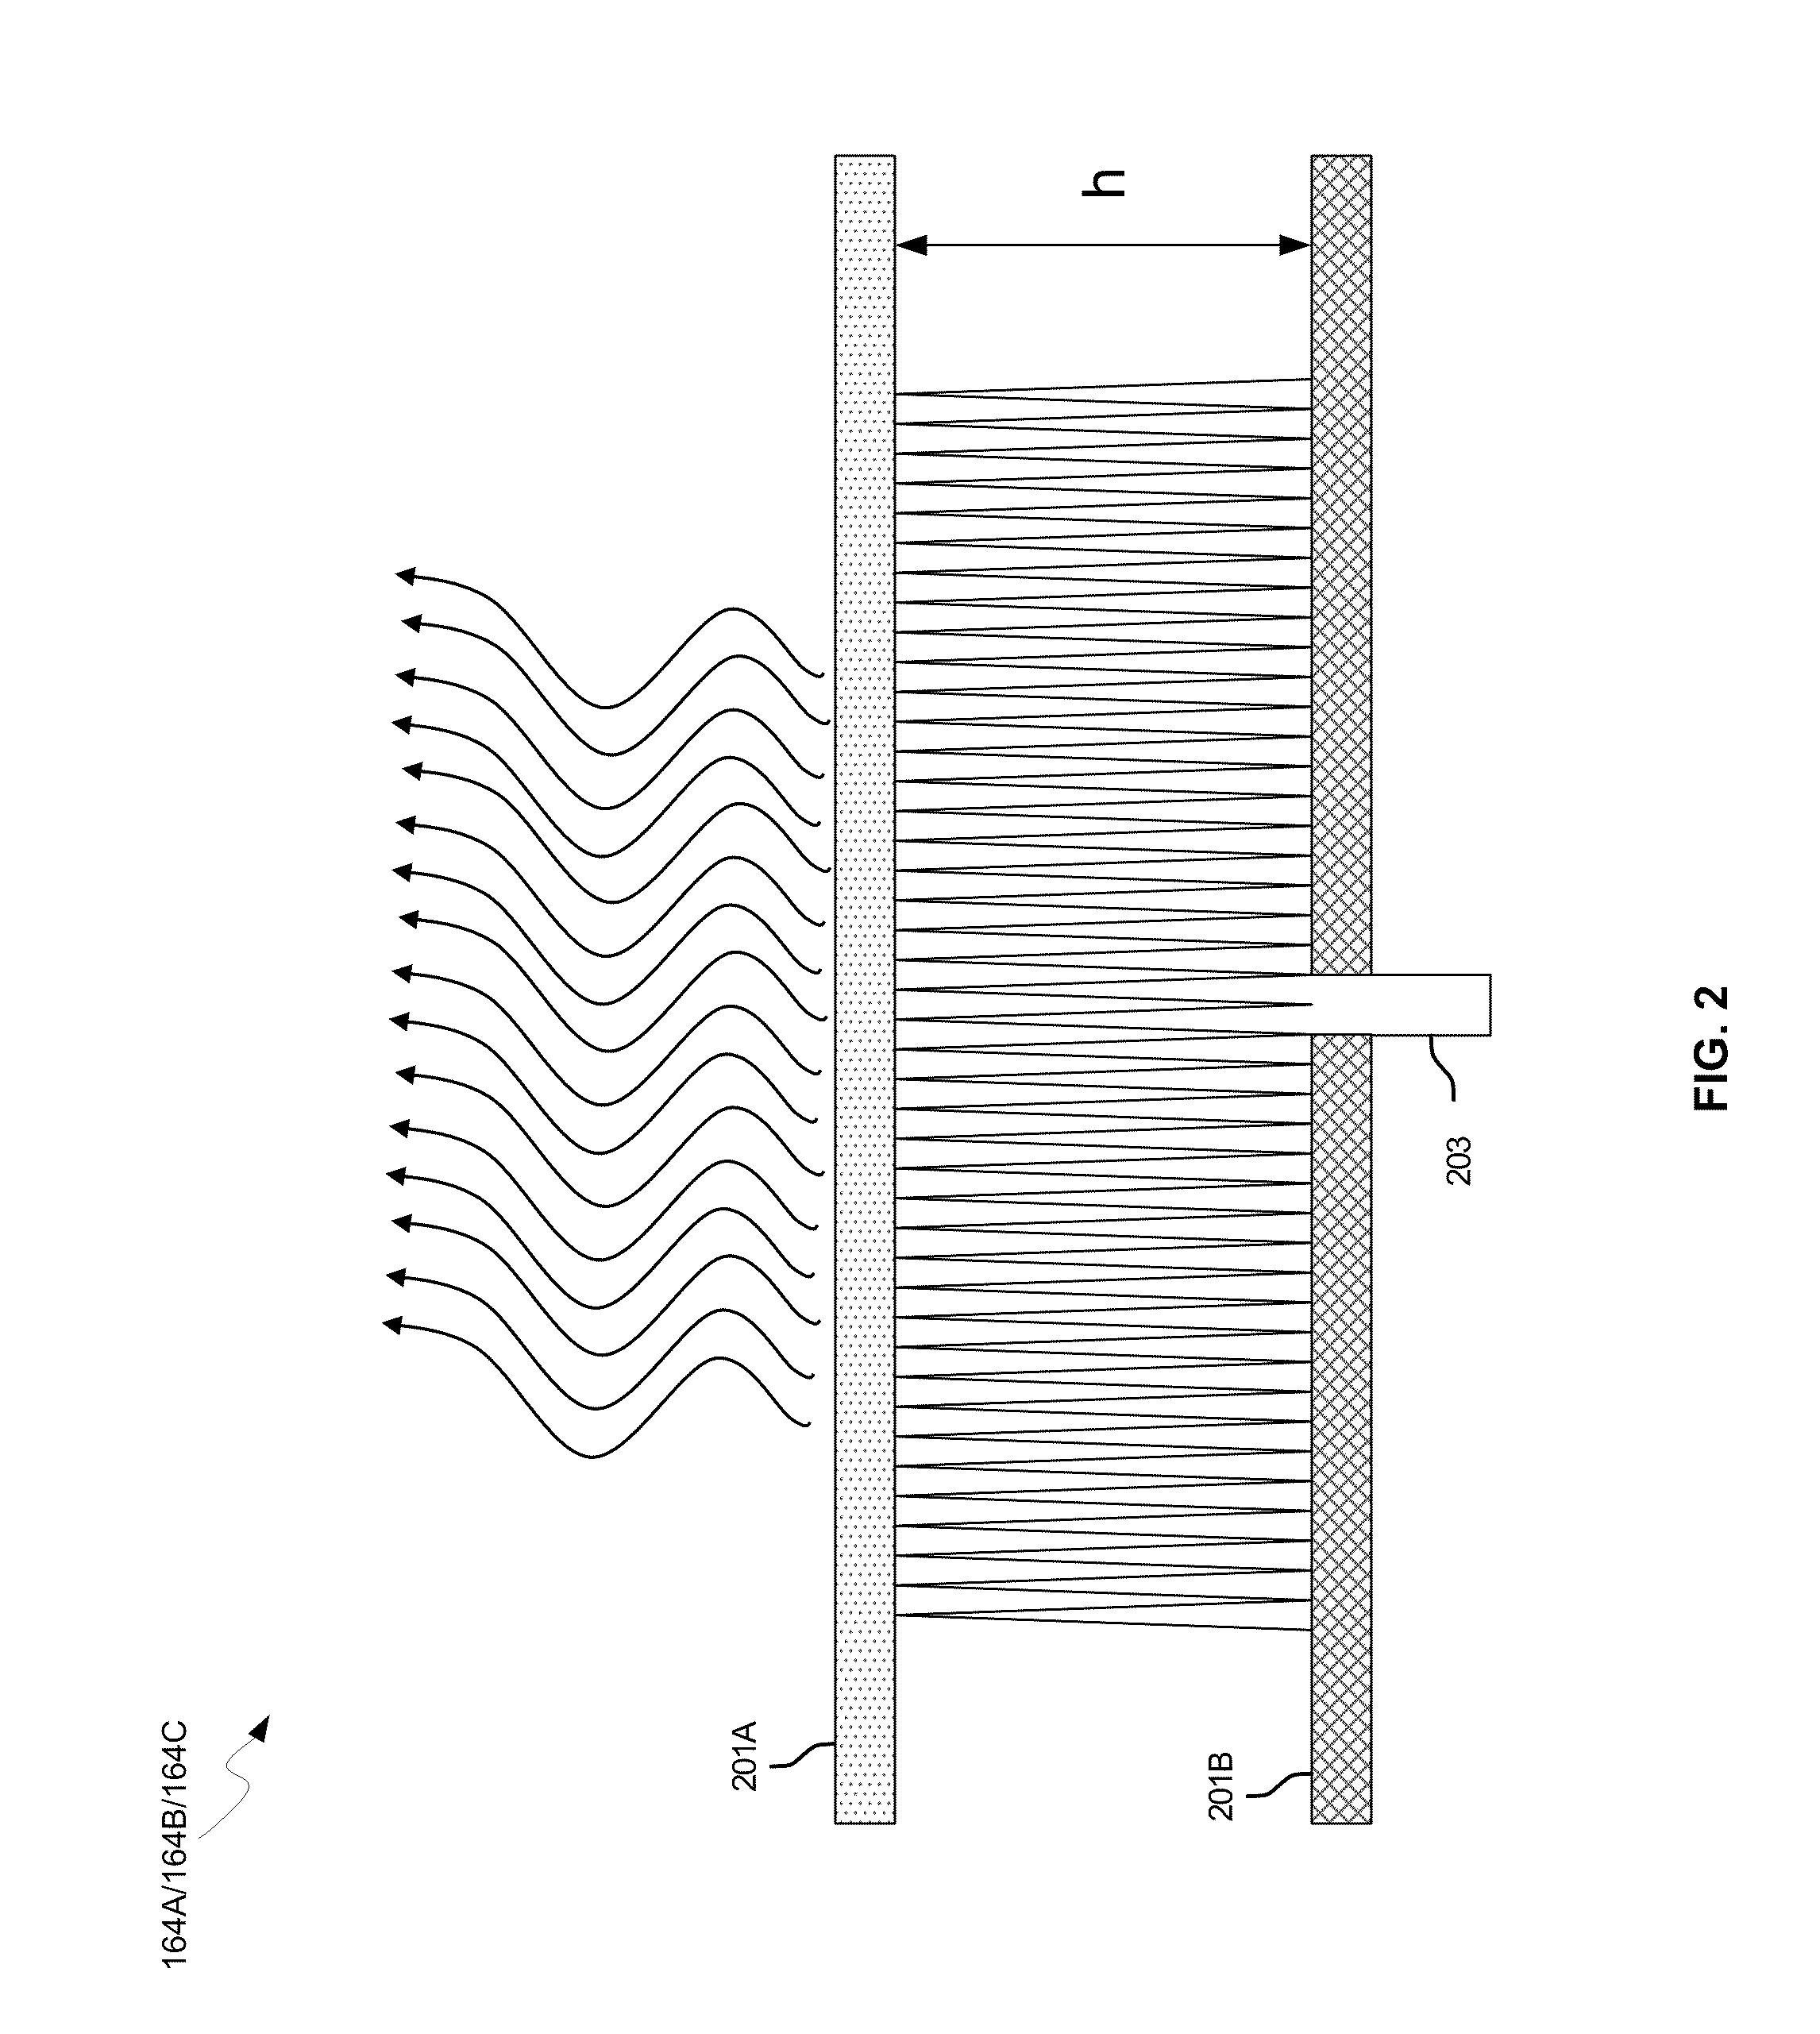 Method and System for a Leaky Wave Antenna as a Load on a Power Amplifier